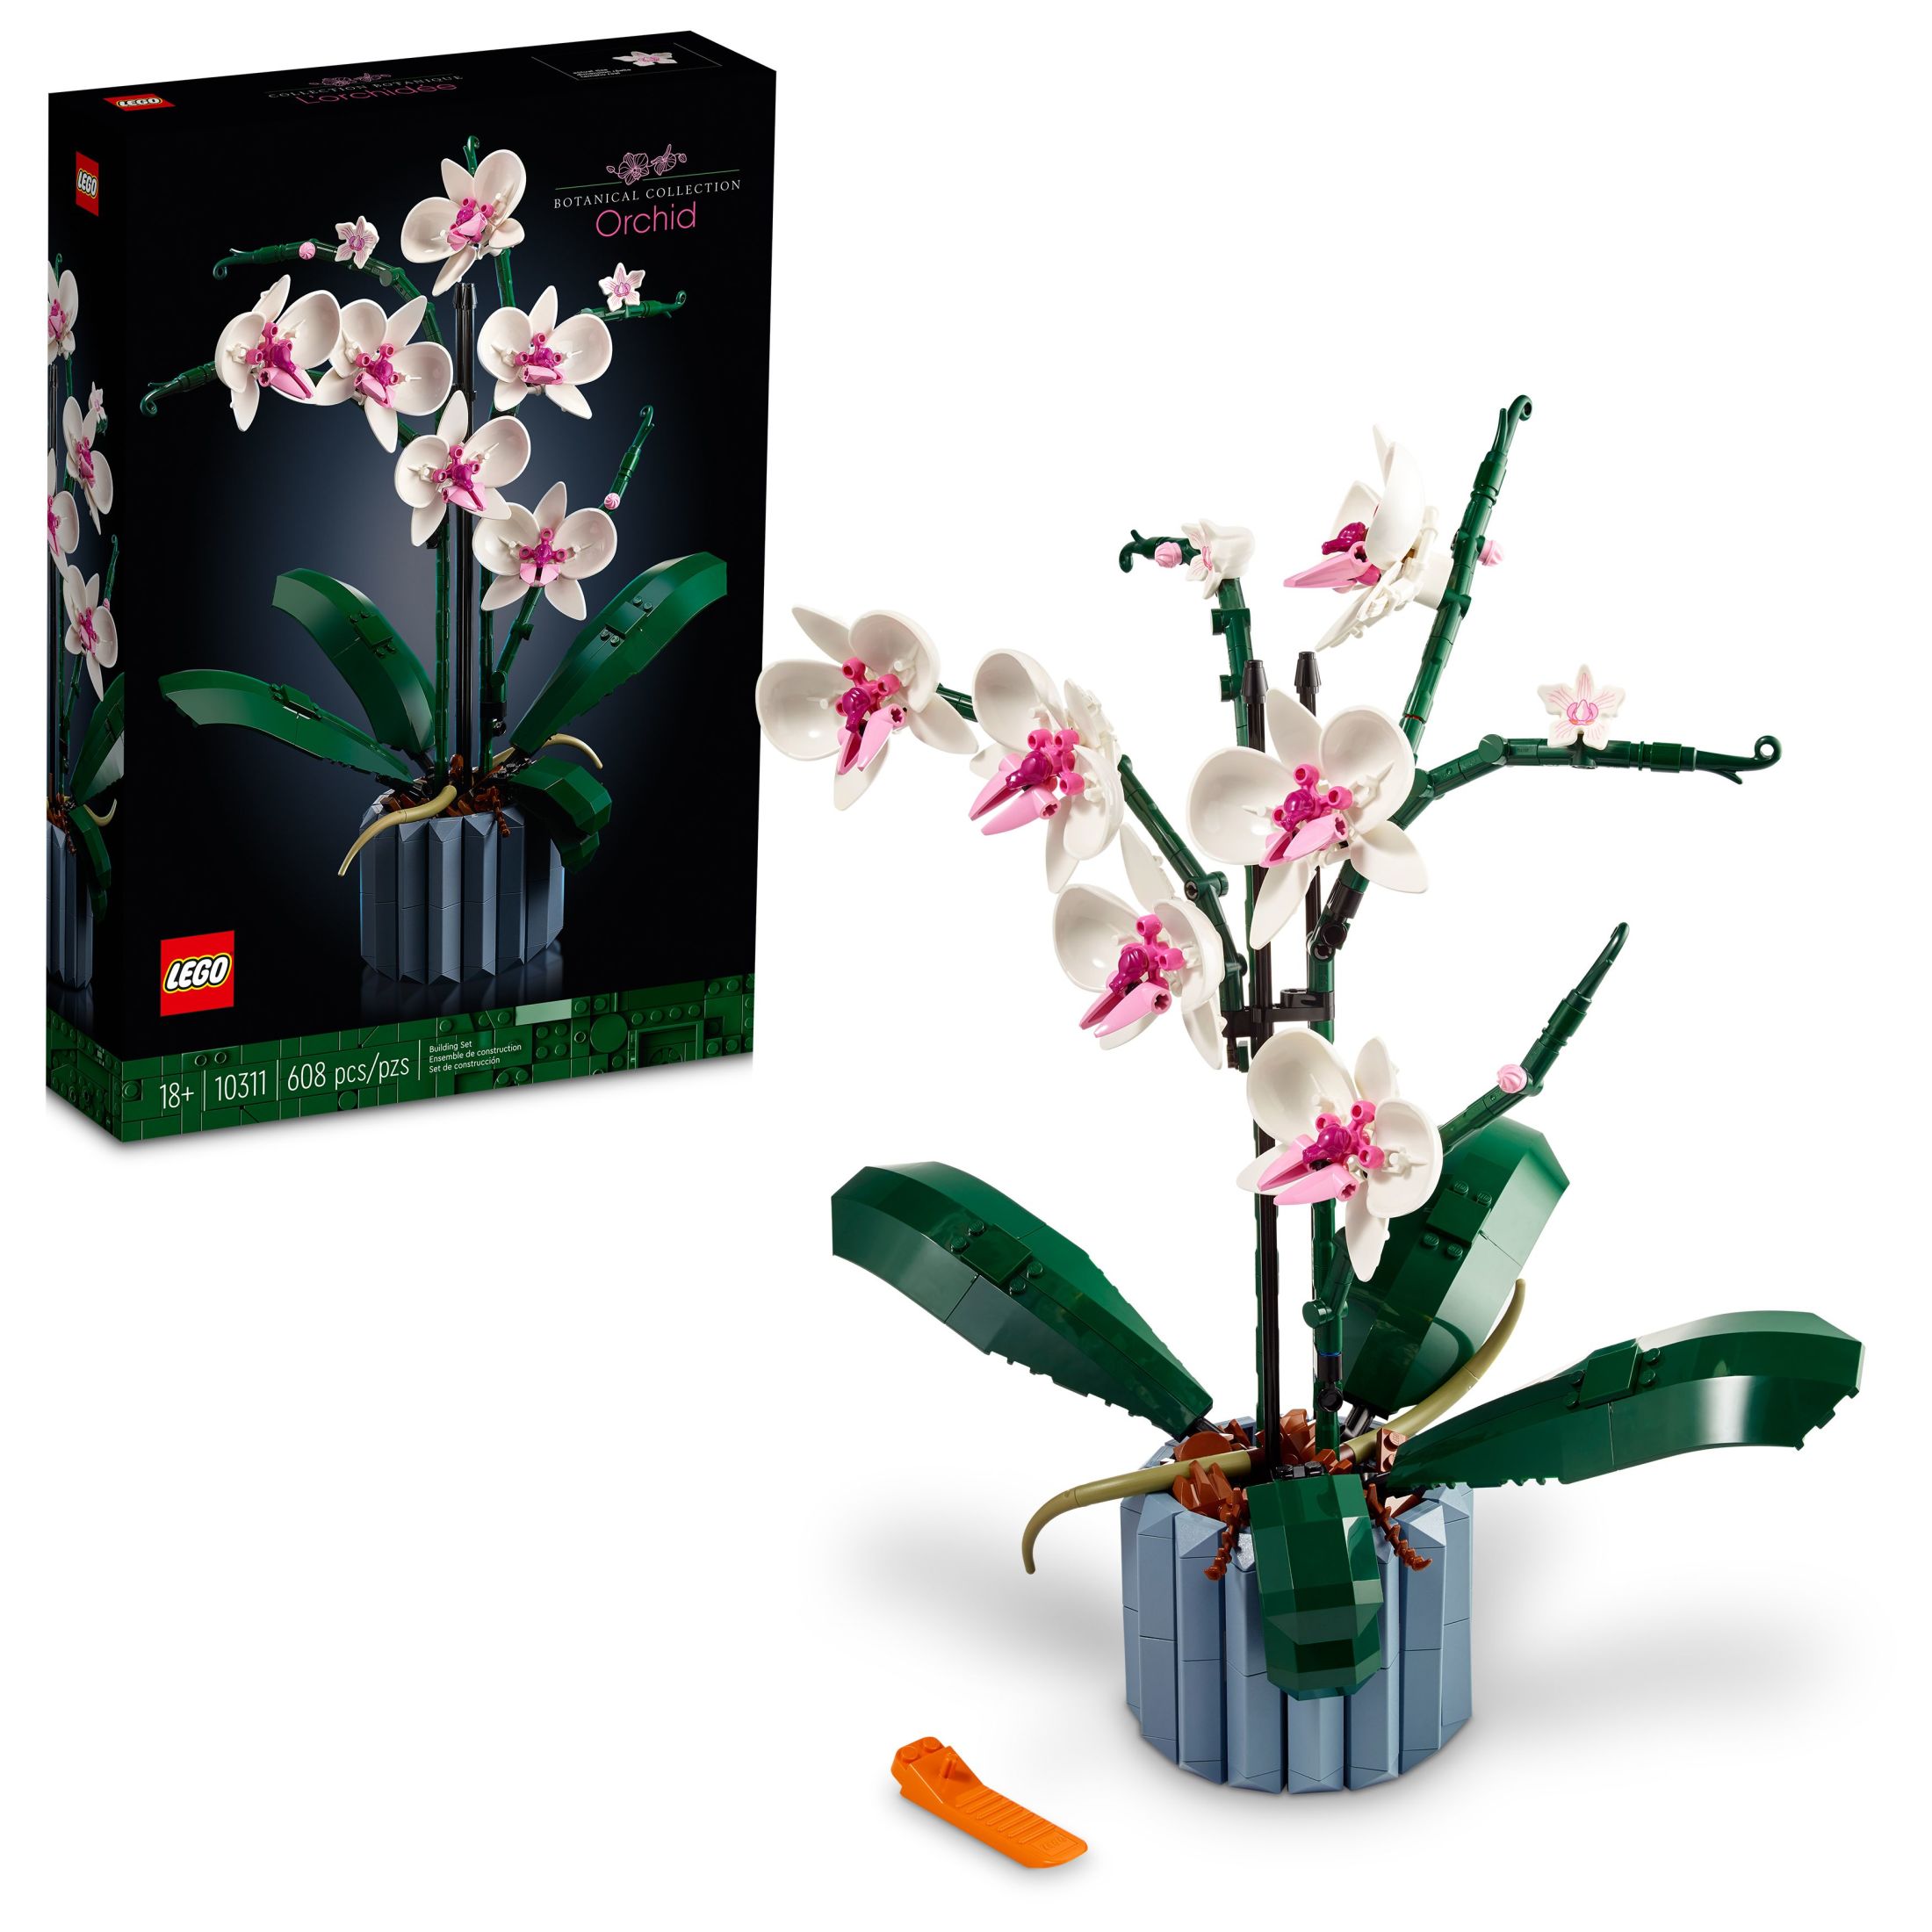 LEGO Icons Orchid Artificial Plant, Building Set with Flowers, Mother's Day Decoration, Botanical Collection, Great Gift for Birthday, Anniversary, or Mother's Day, 10311 - image 1 of 9